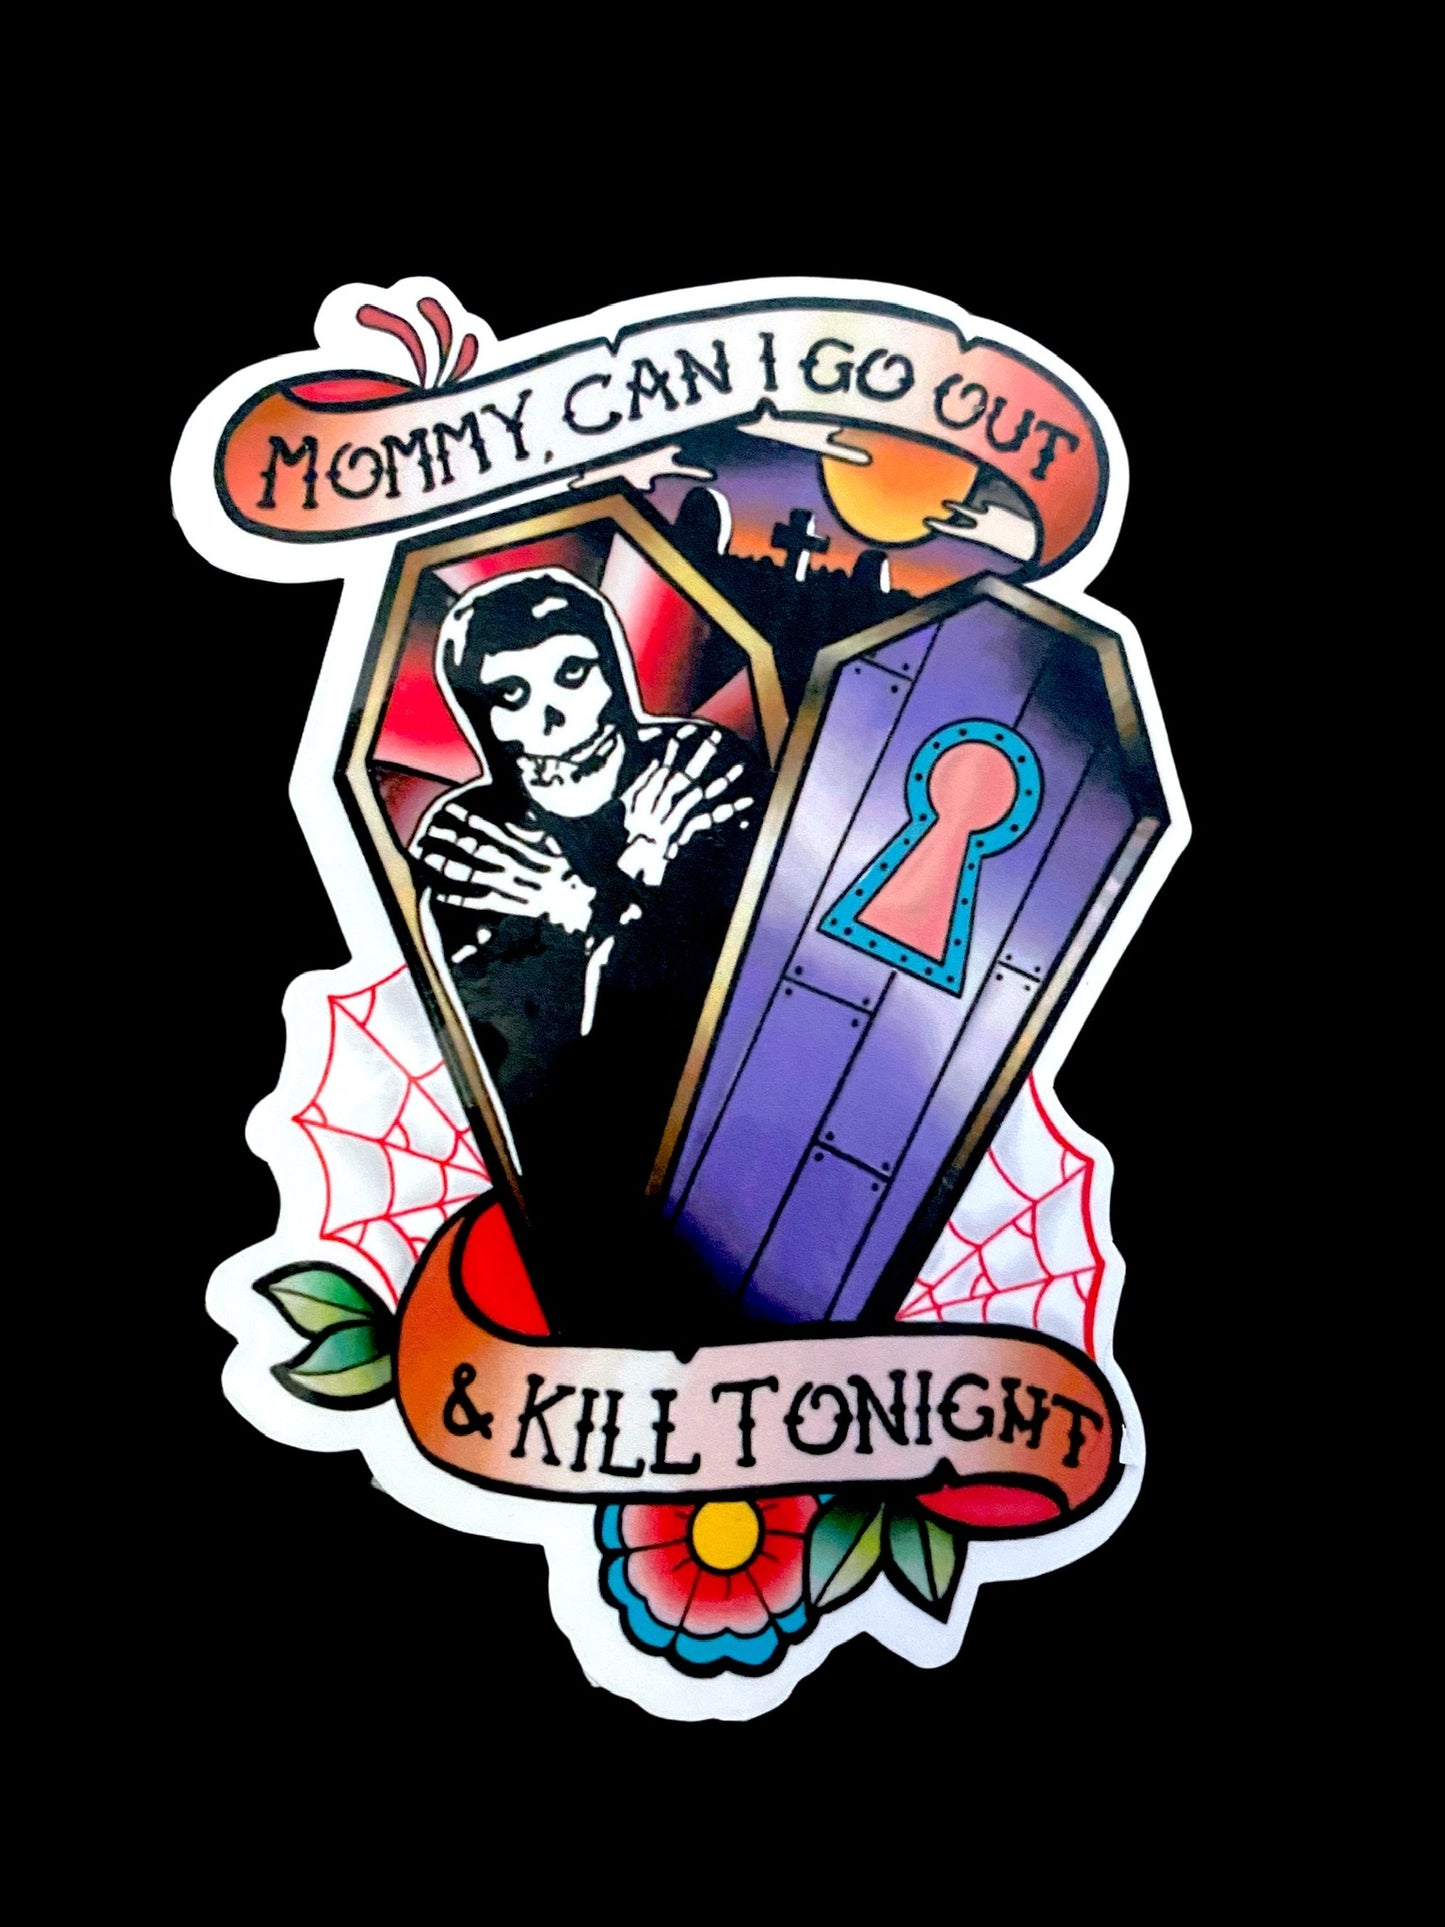 Misfits: Mommy, Can I Go Out And Kill Tonight? Sticker.